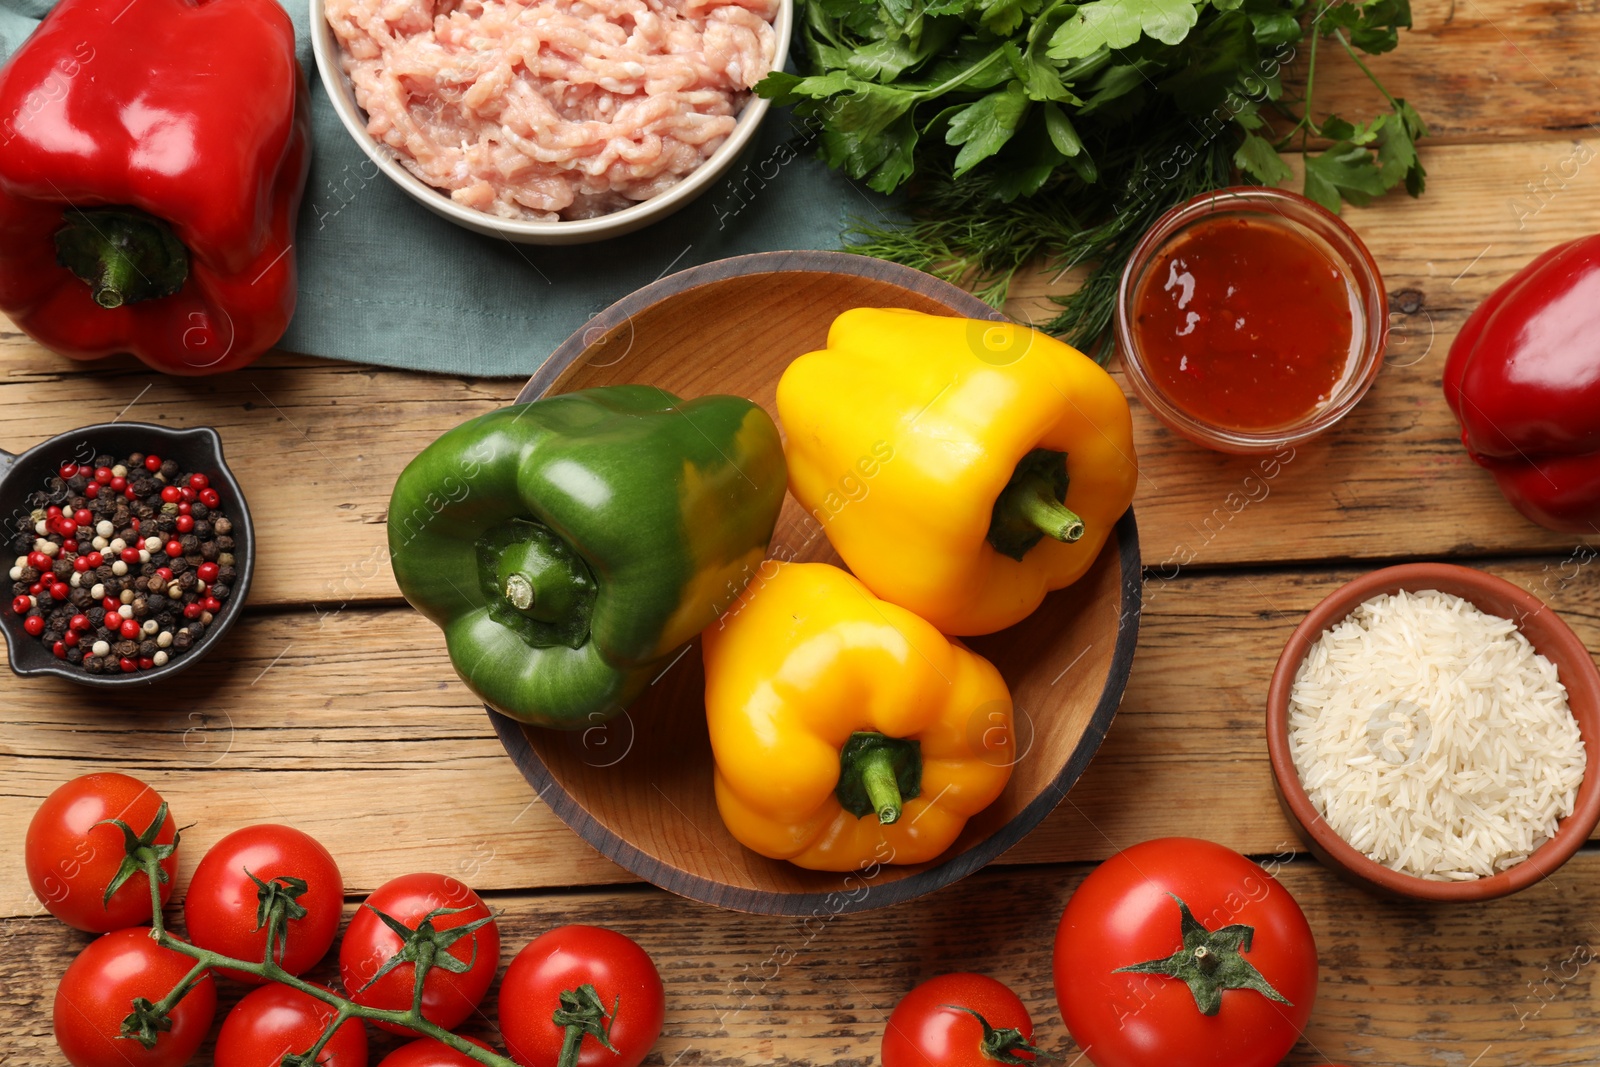 Photo of Making stuffed peppers. Vegetables and ground meat on wooden table, flat lay